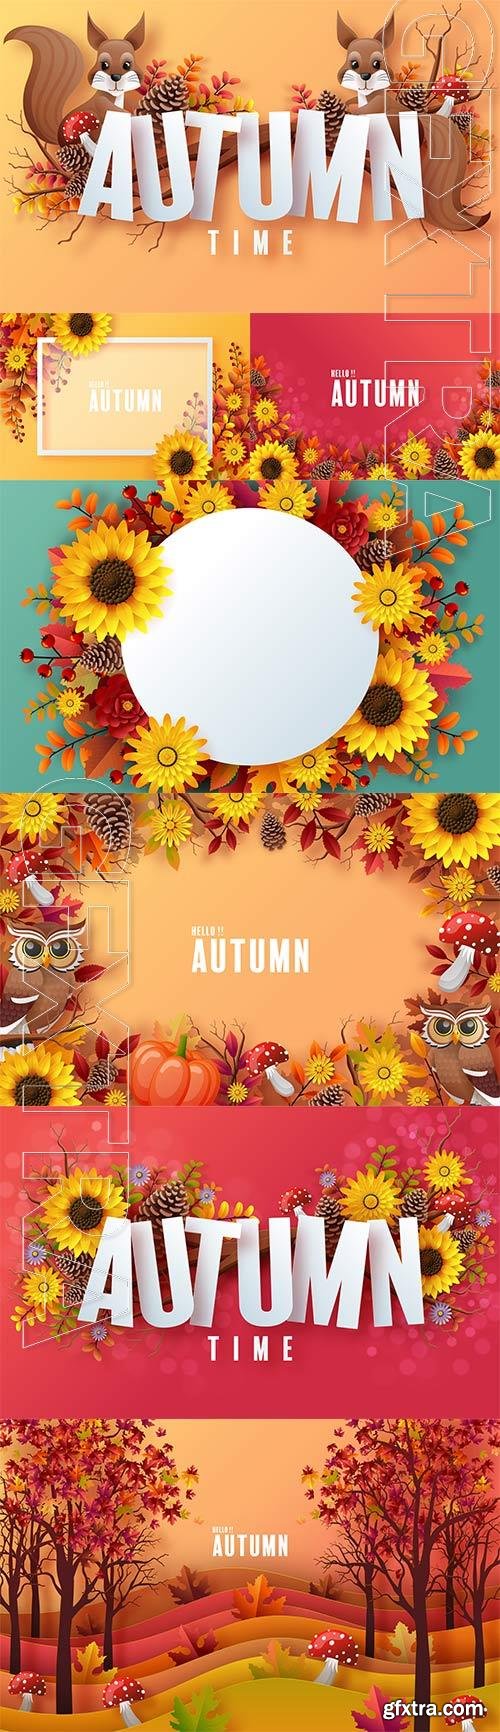 Autumn vector background with colorful autumn leaves